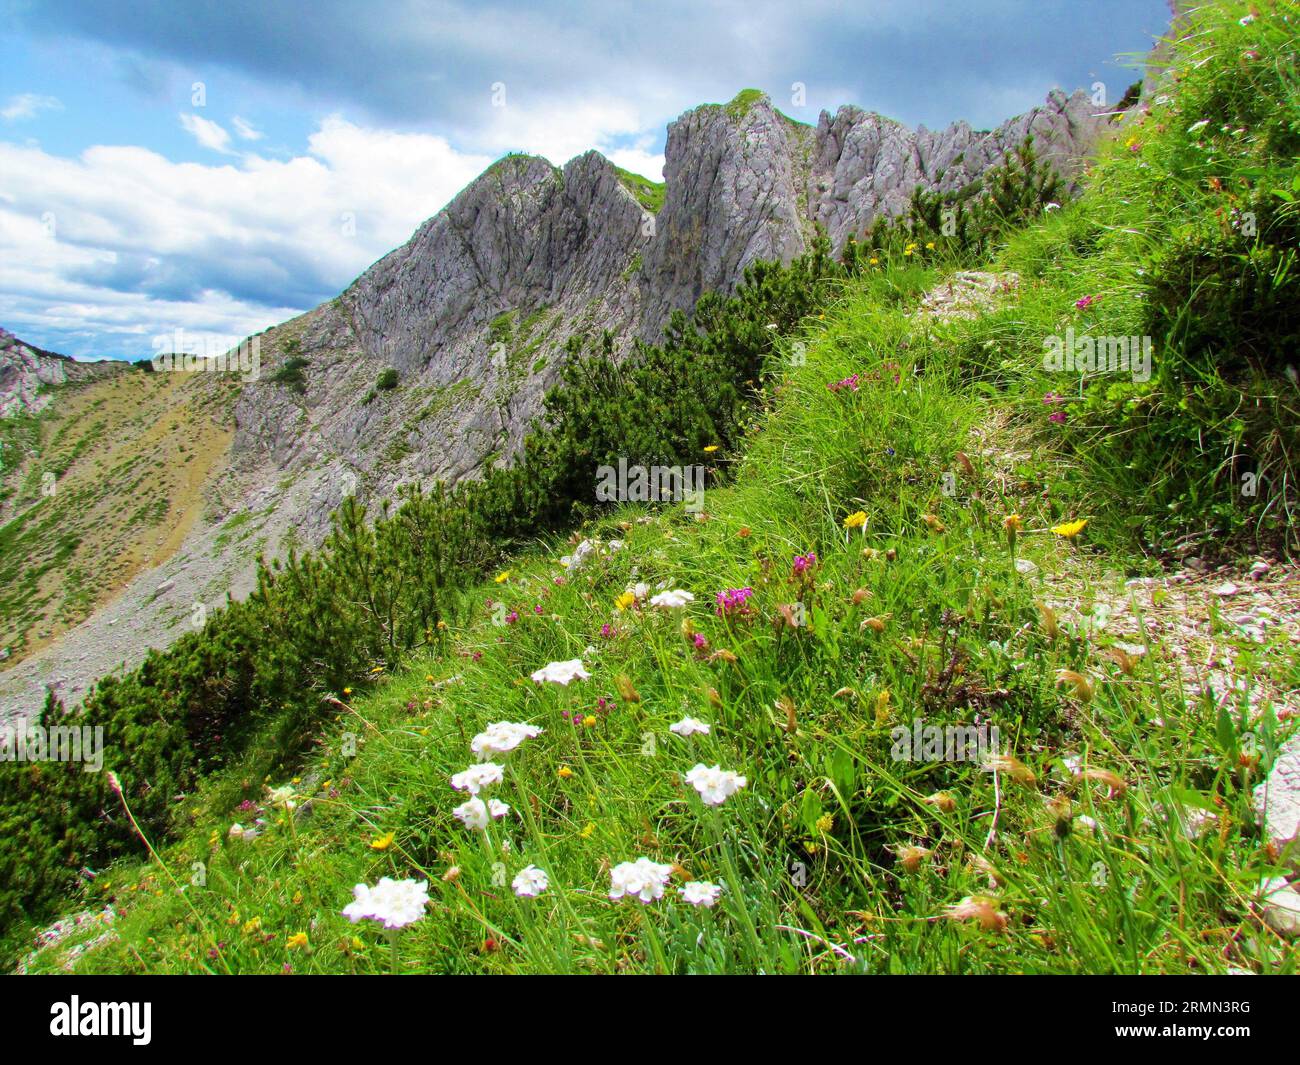 Scenic view of the mountain Visevnik in the Julian alps, Slovenia with a meadow in front with white blooming silvery yarrow (Achillea clavennae) and r Stock Photo